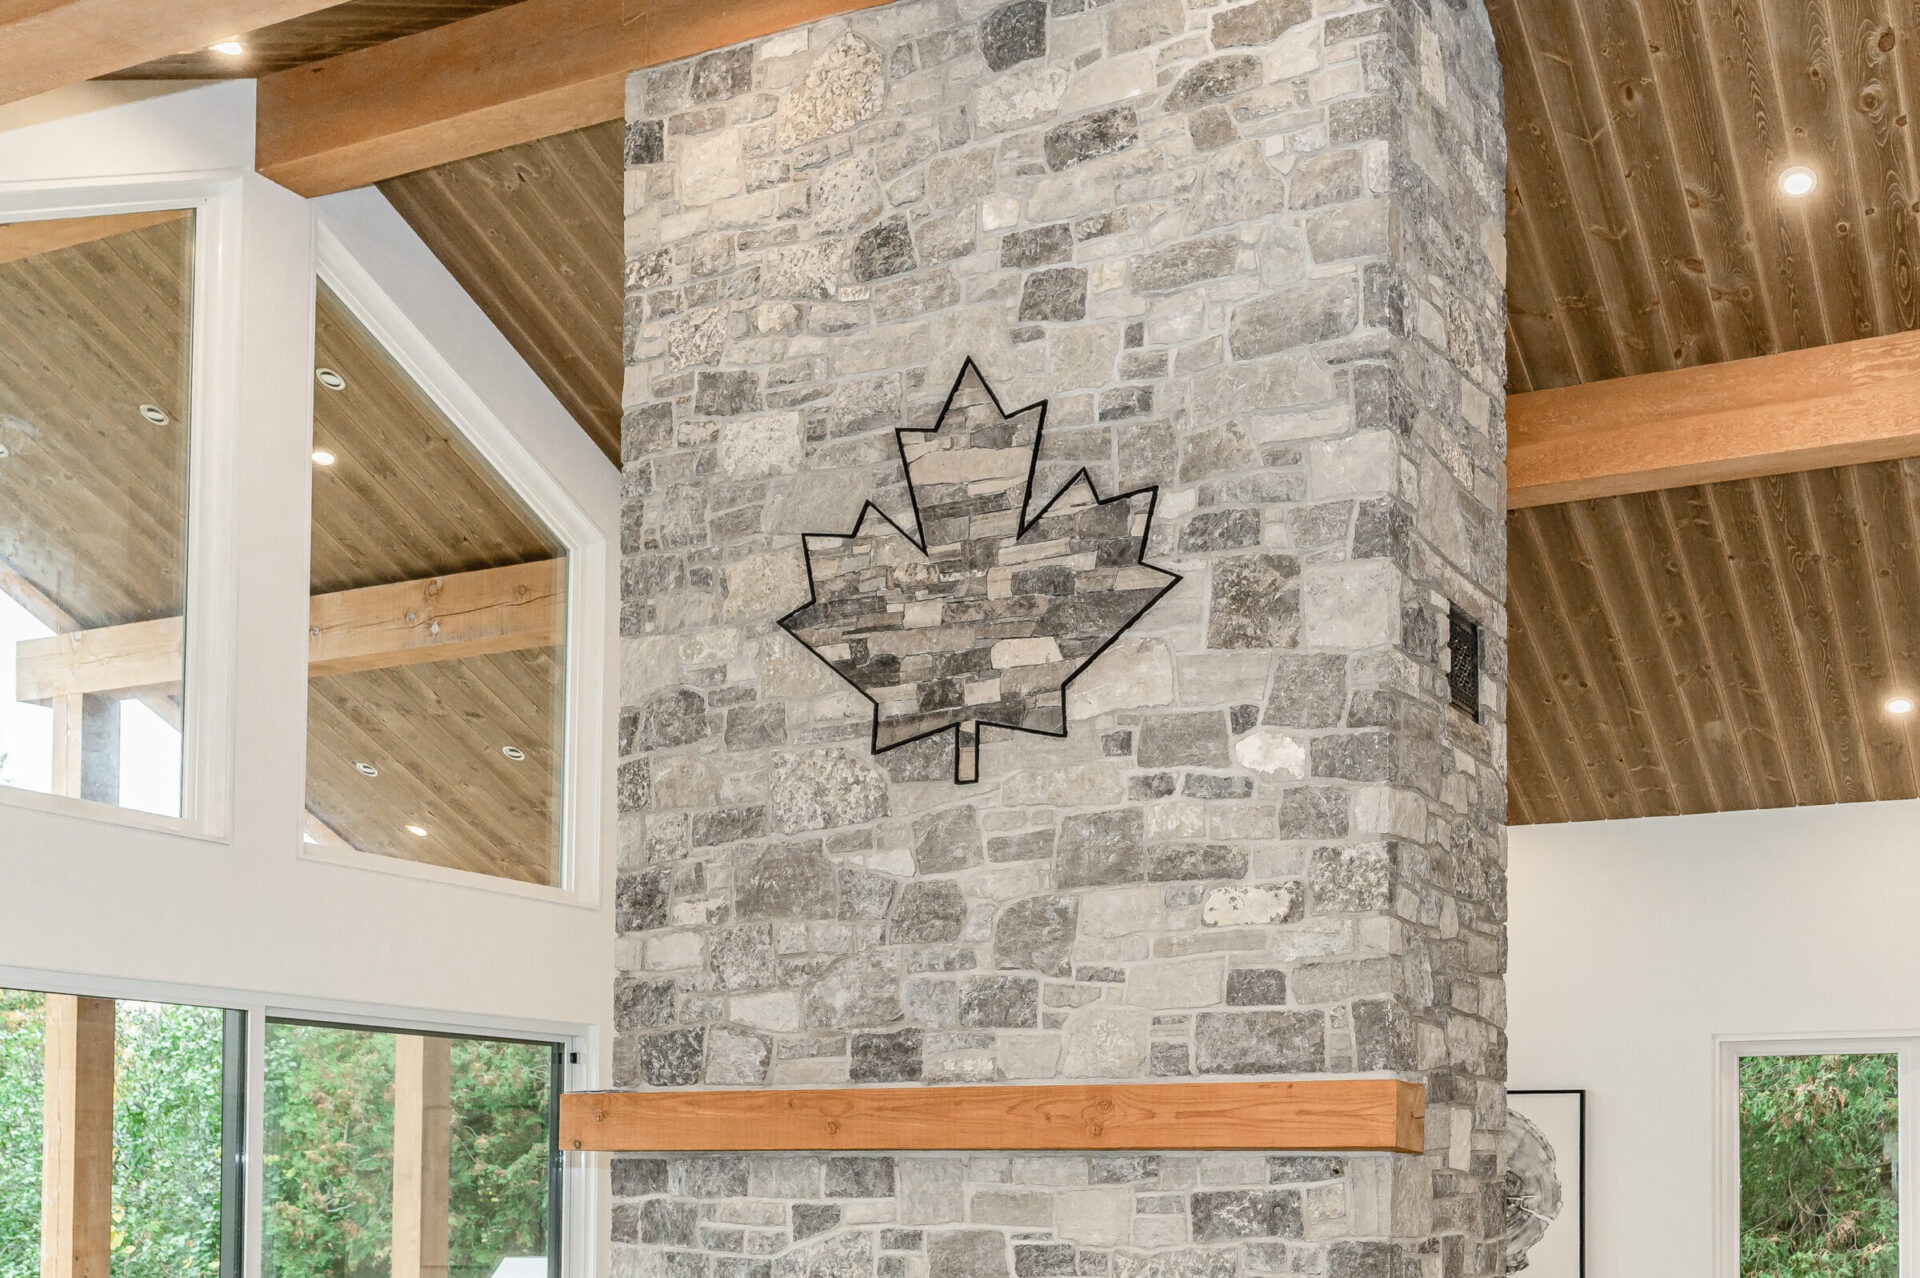 This interior features a stone pillar with a large maple leaf design, wooden beams, recessed lighting, and large windows in a modern setting.